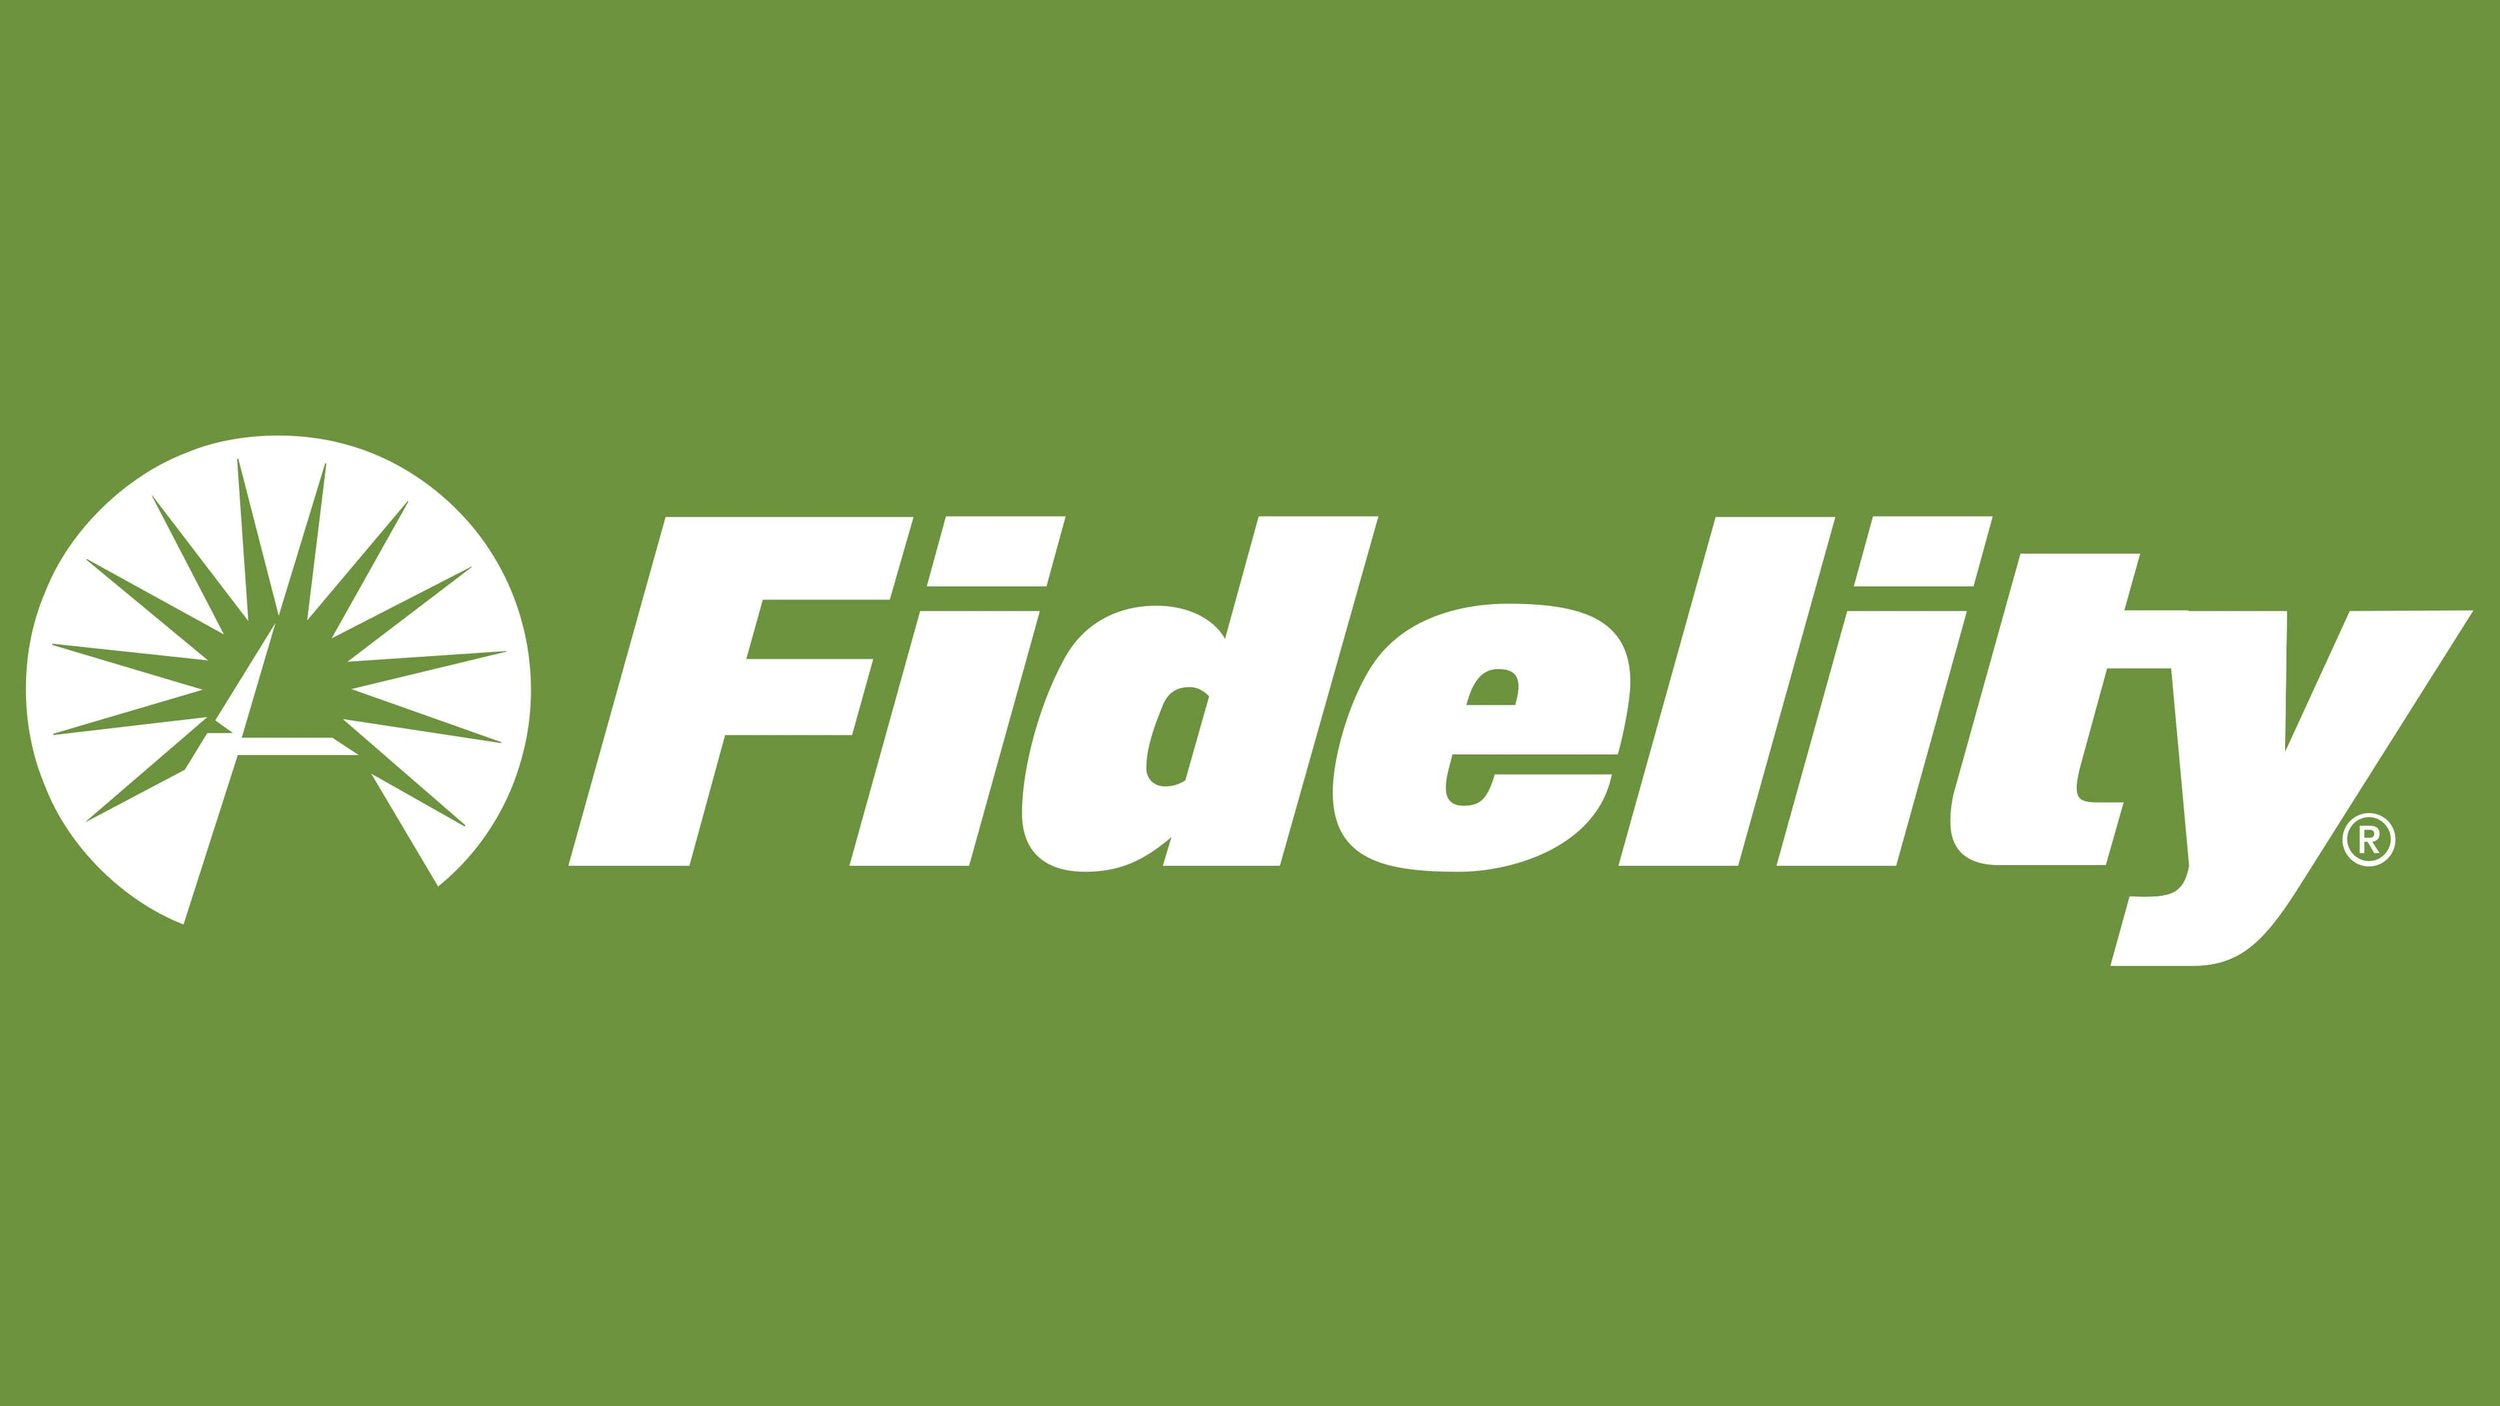 Log in to your Fidelity Investments or NetBenefits accounts here.